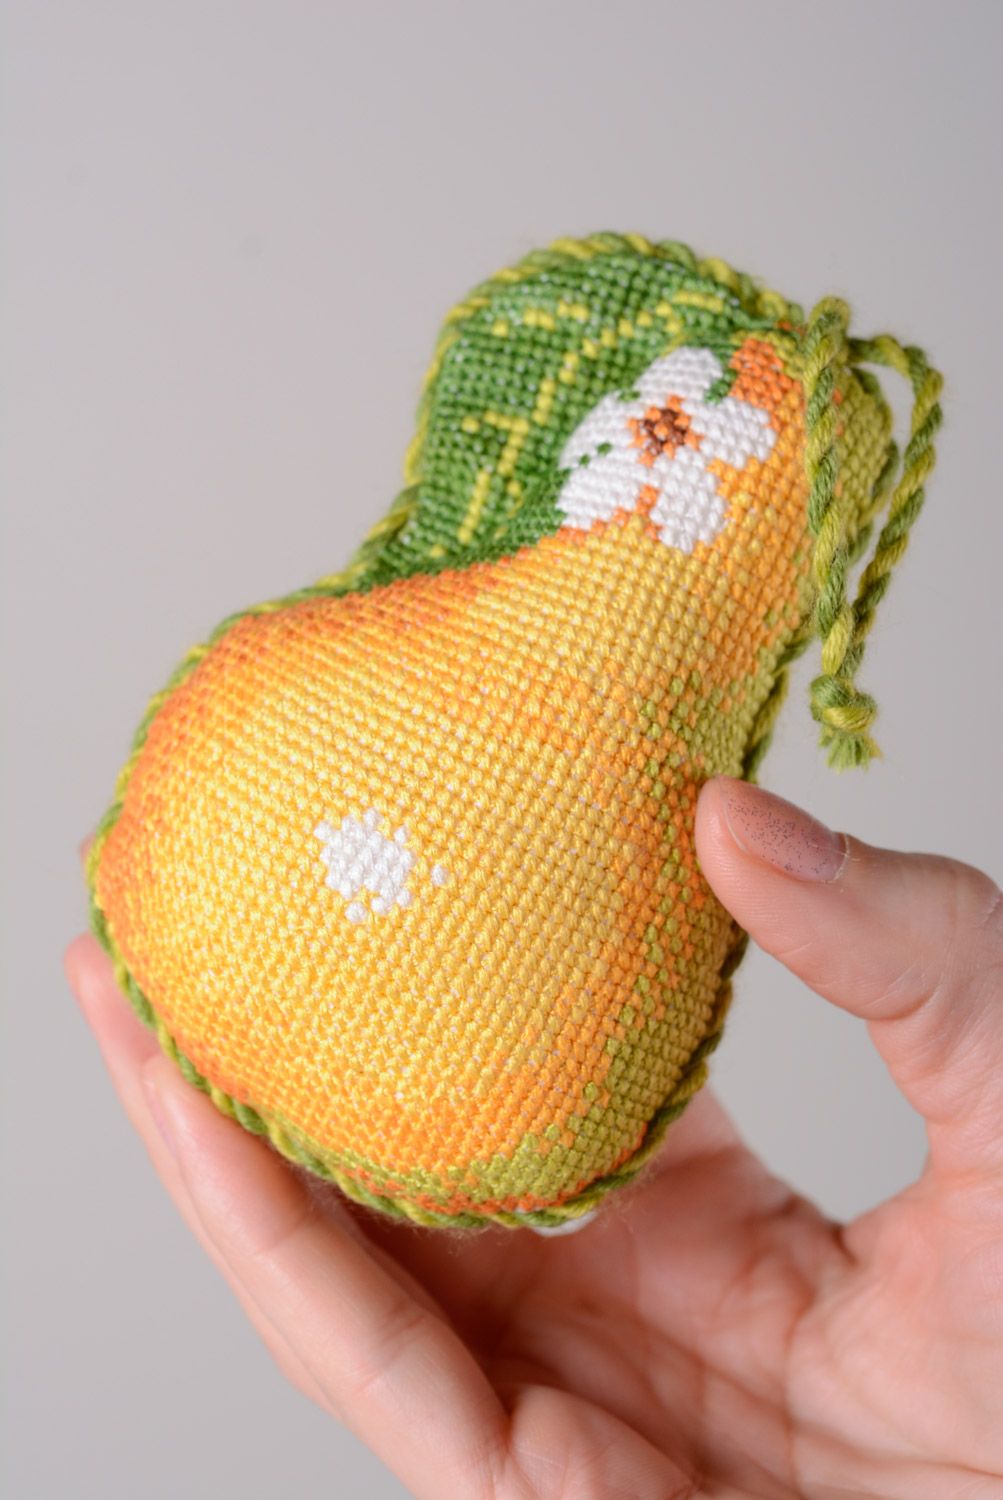 Handmade soft pincushion in the shape of pear with cross stitch embroidery photo 4